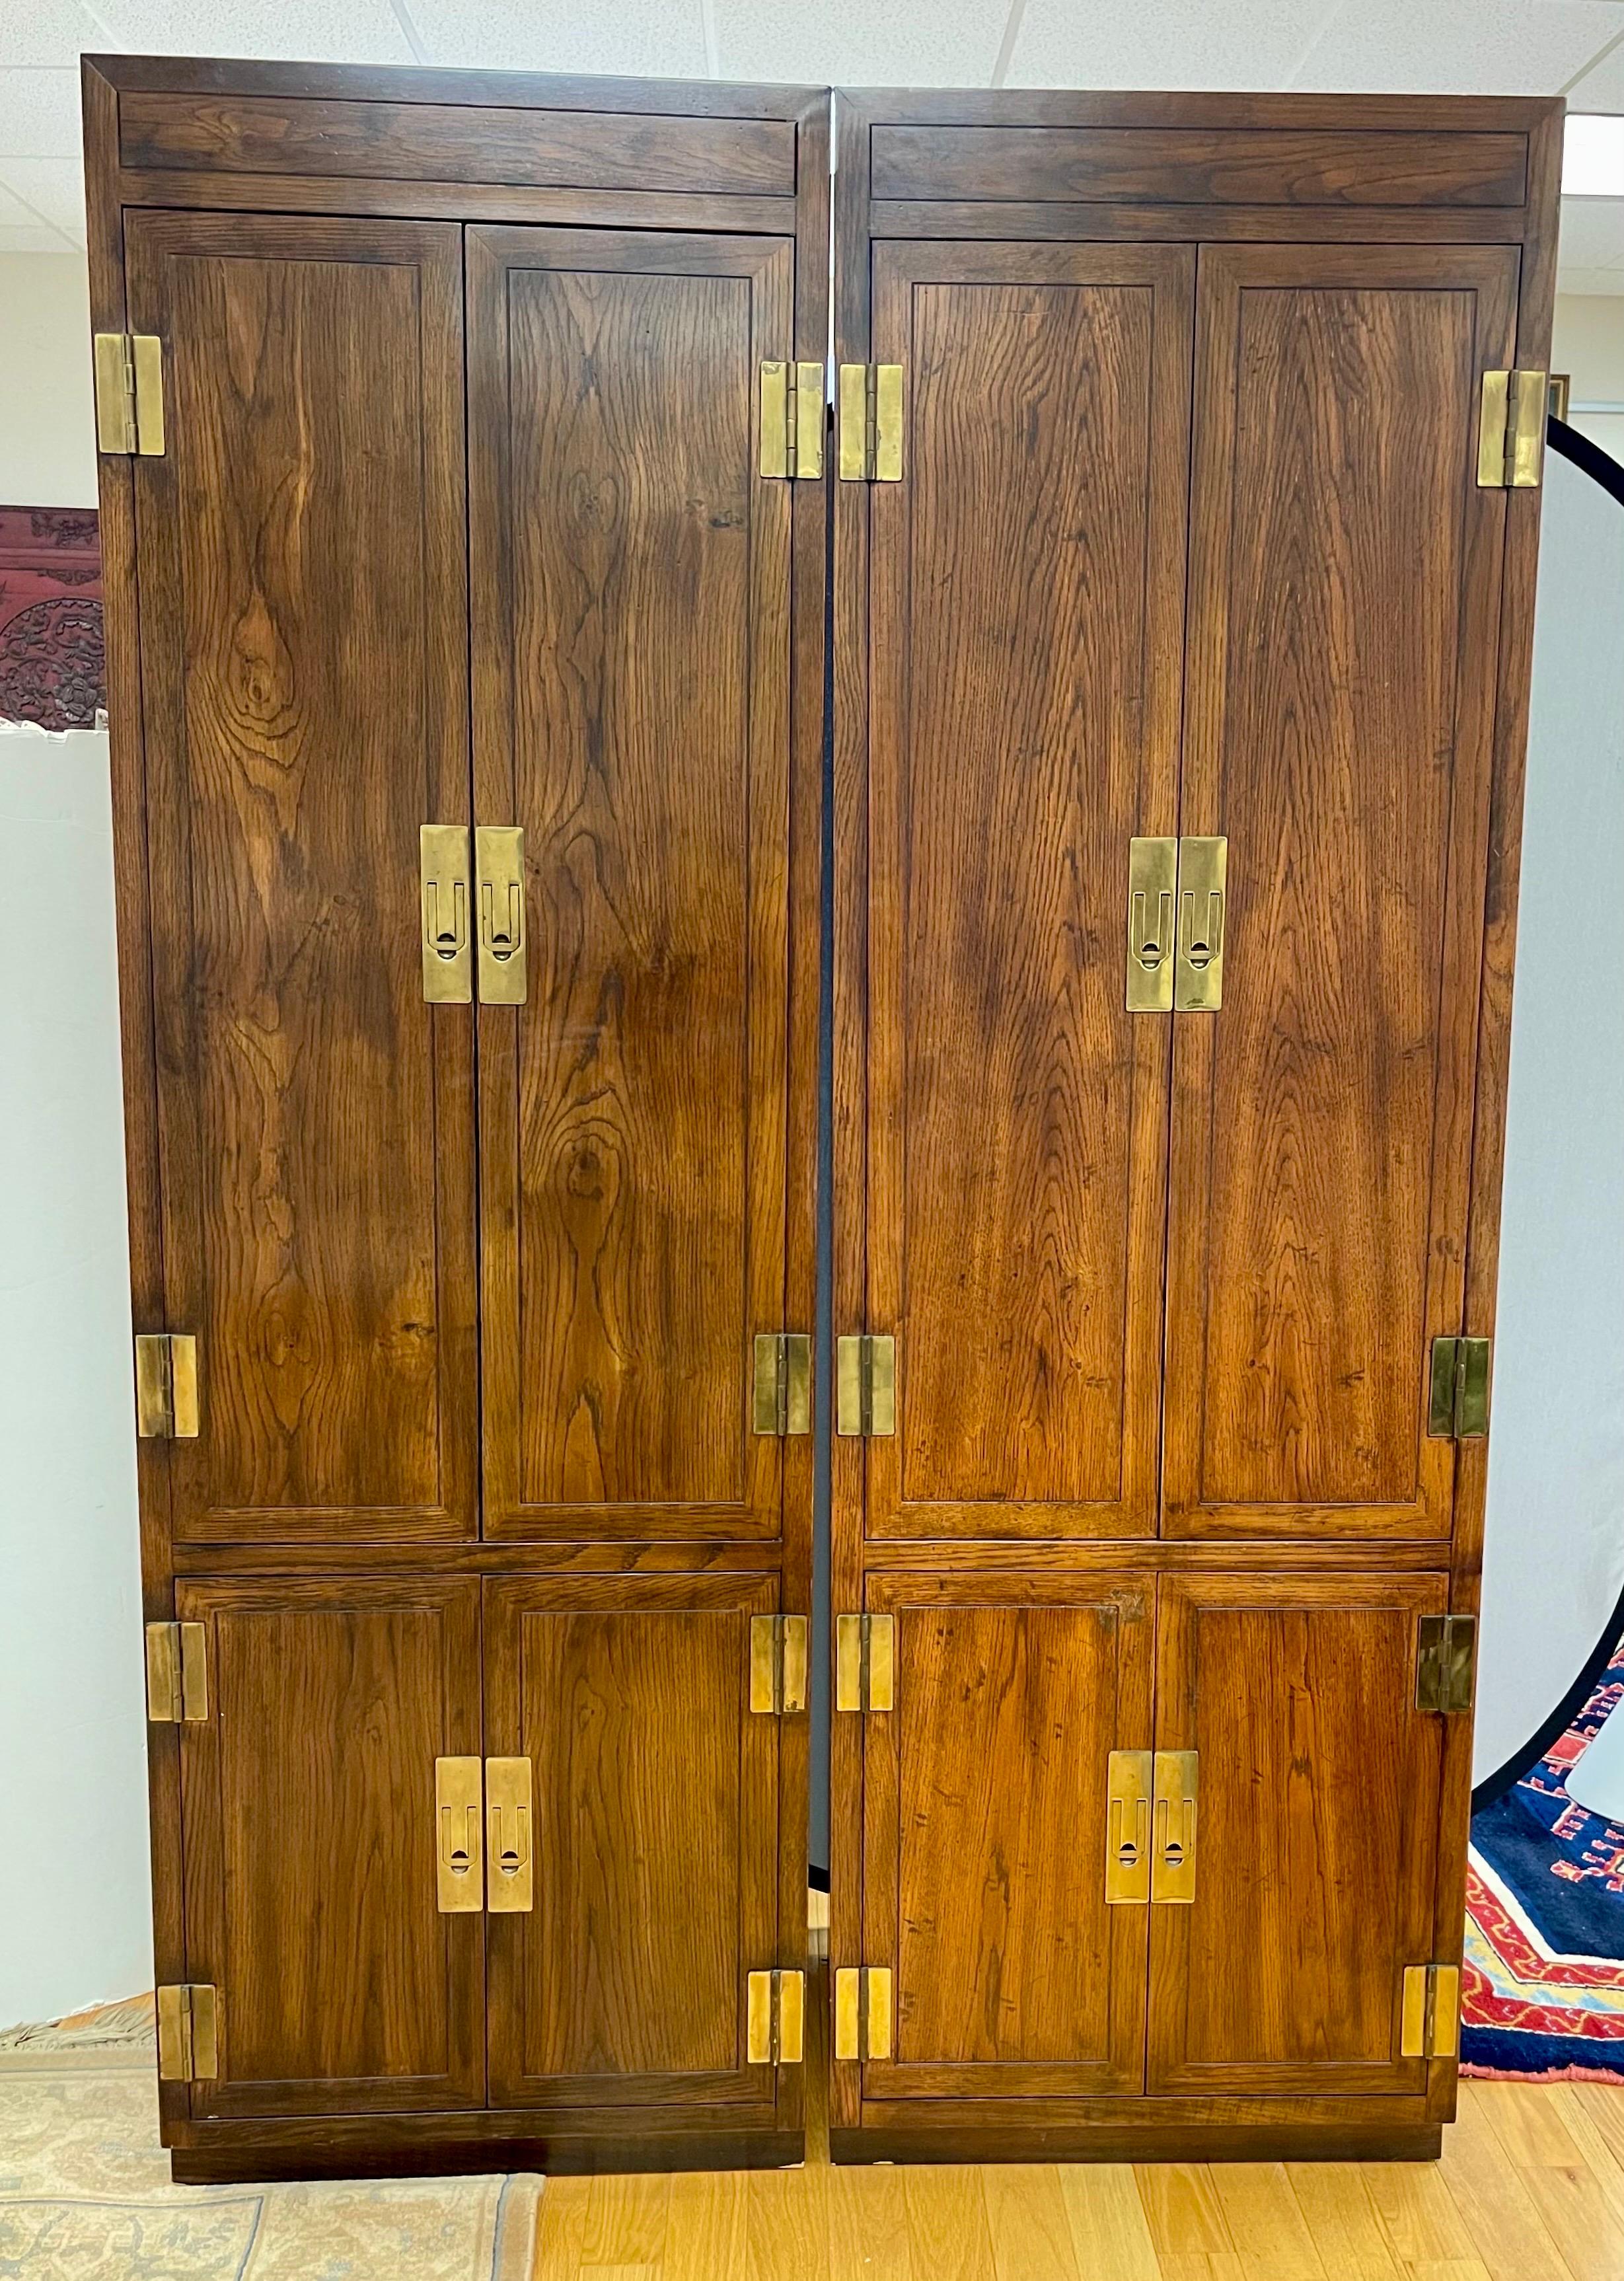 Vintage Campaign style chifforobe cabinets, made by American manufacturer, Henredon. Part of Henredon’s early Scene One collection. Each dark-stained, hardwood case fronts are fitted with brass hinges and flush latch pulls, over a toe-kick base.